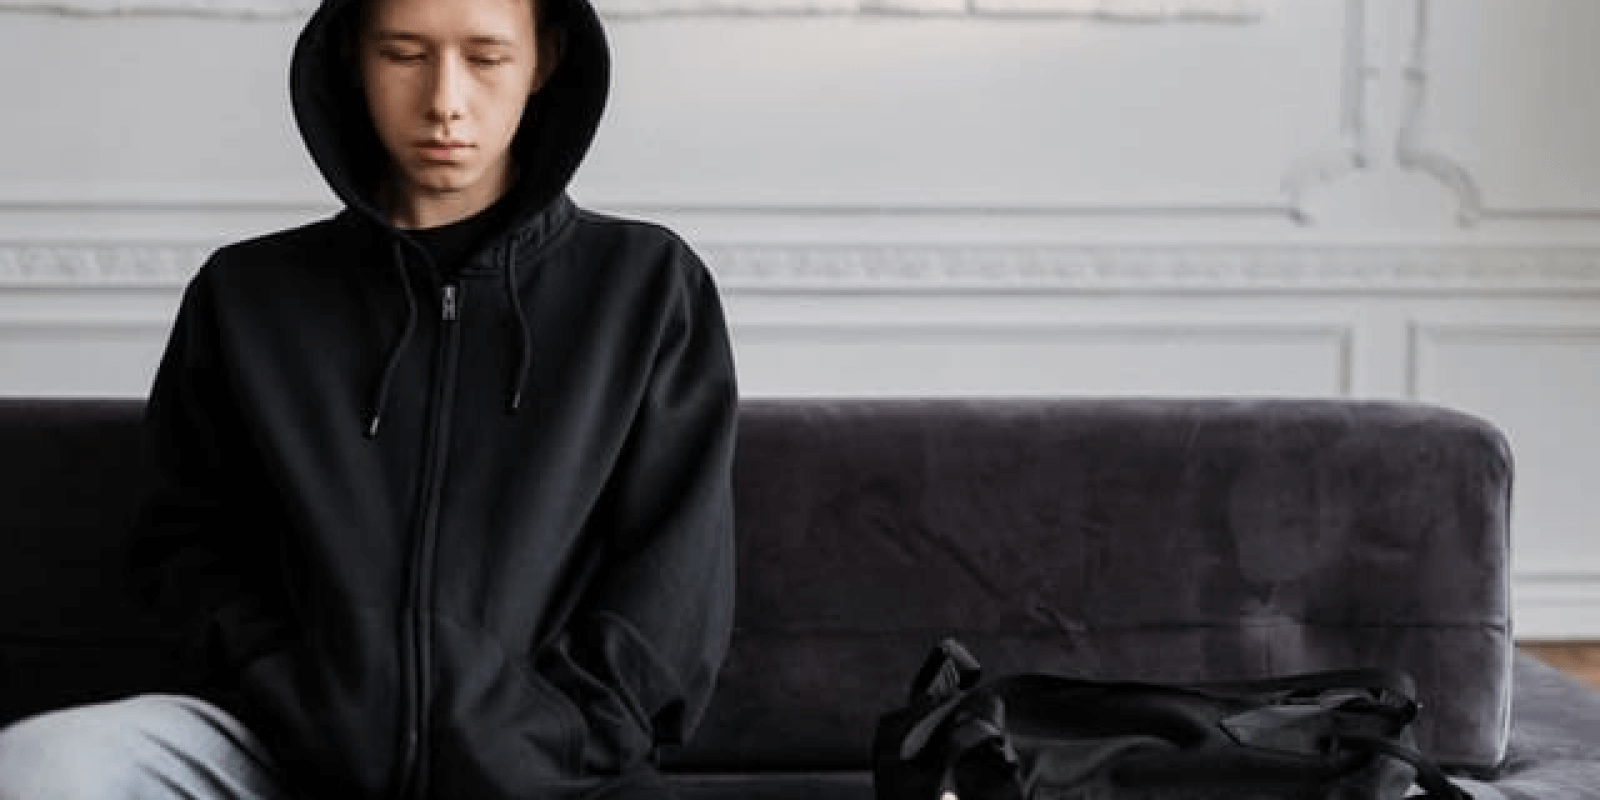 A teen boy wearing a black hoodie looking down while sitting on a sofa with his backpack